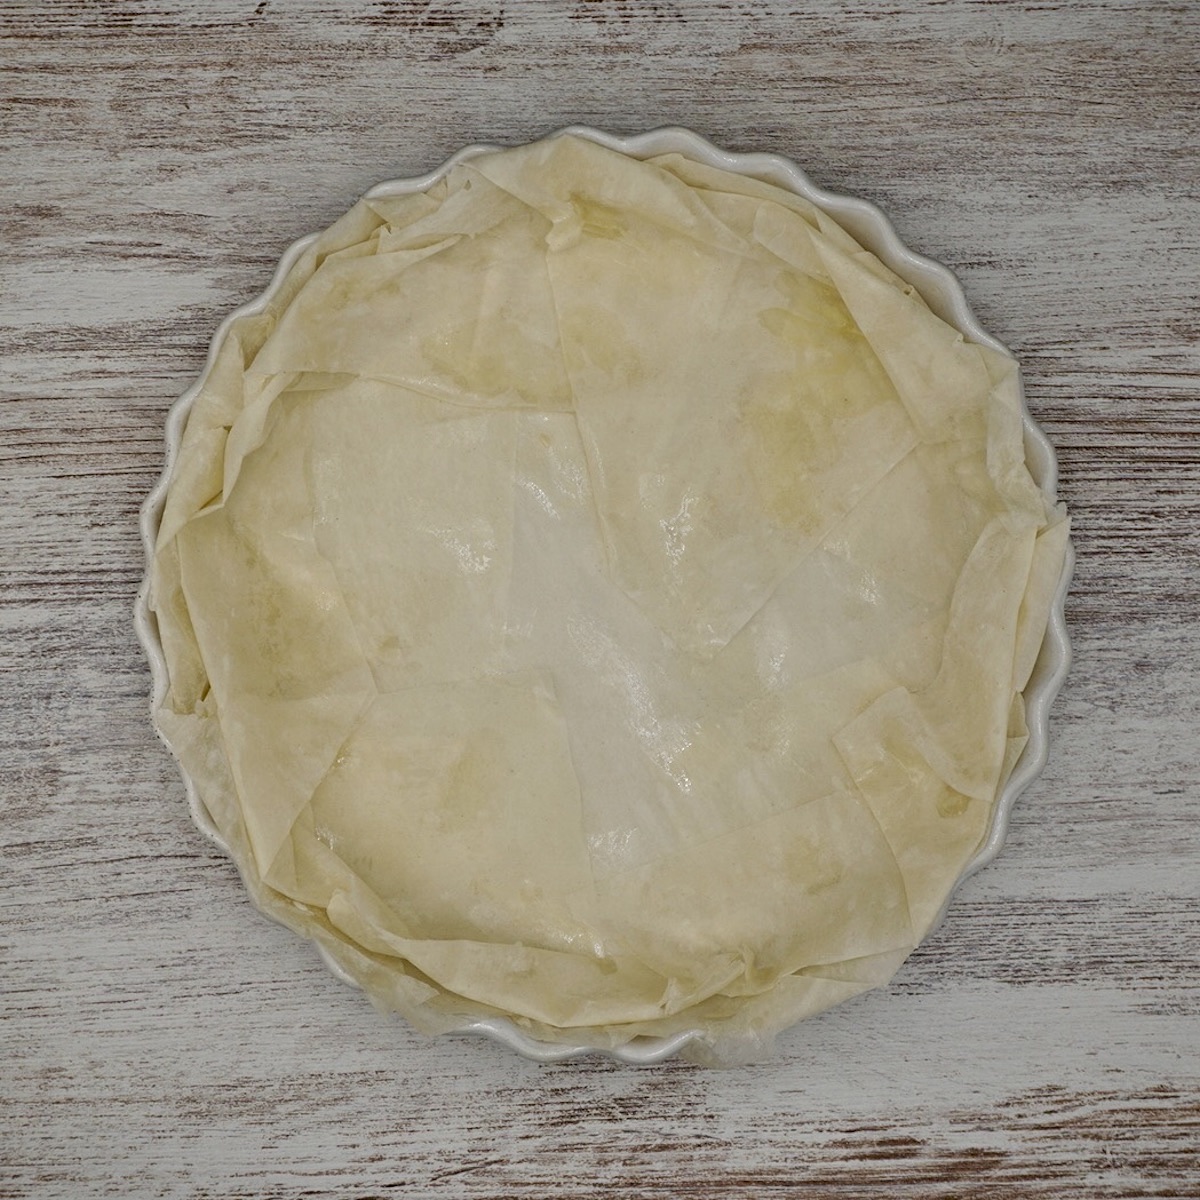 A tart dish lined with filo pastry.